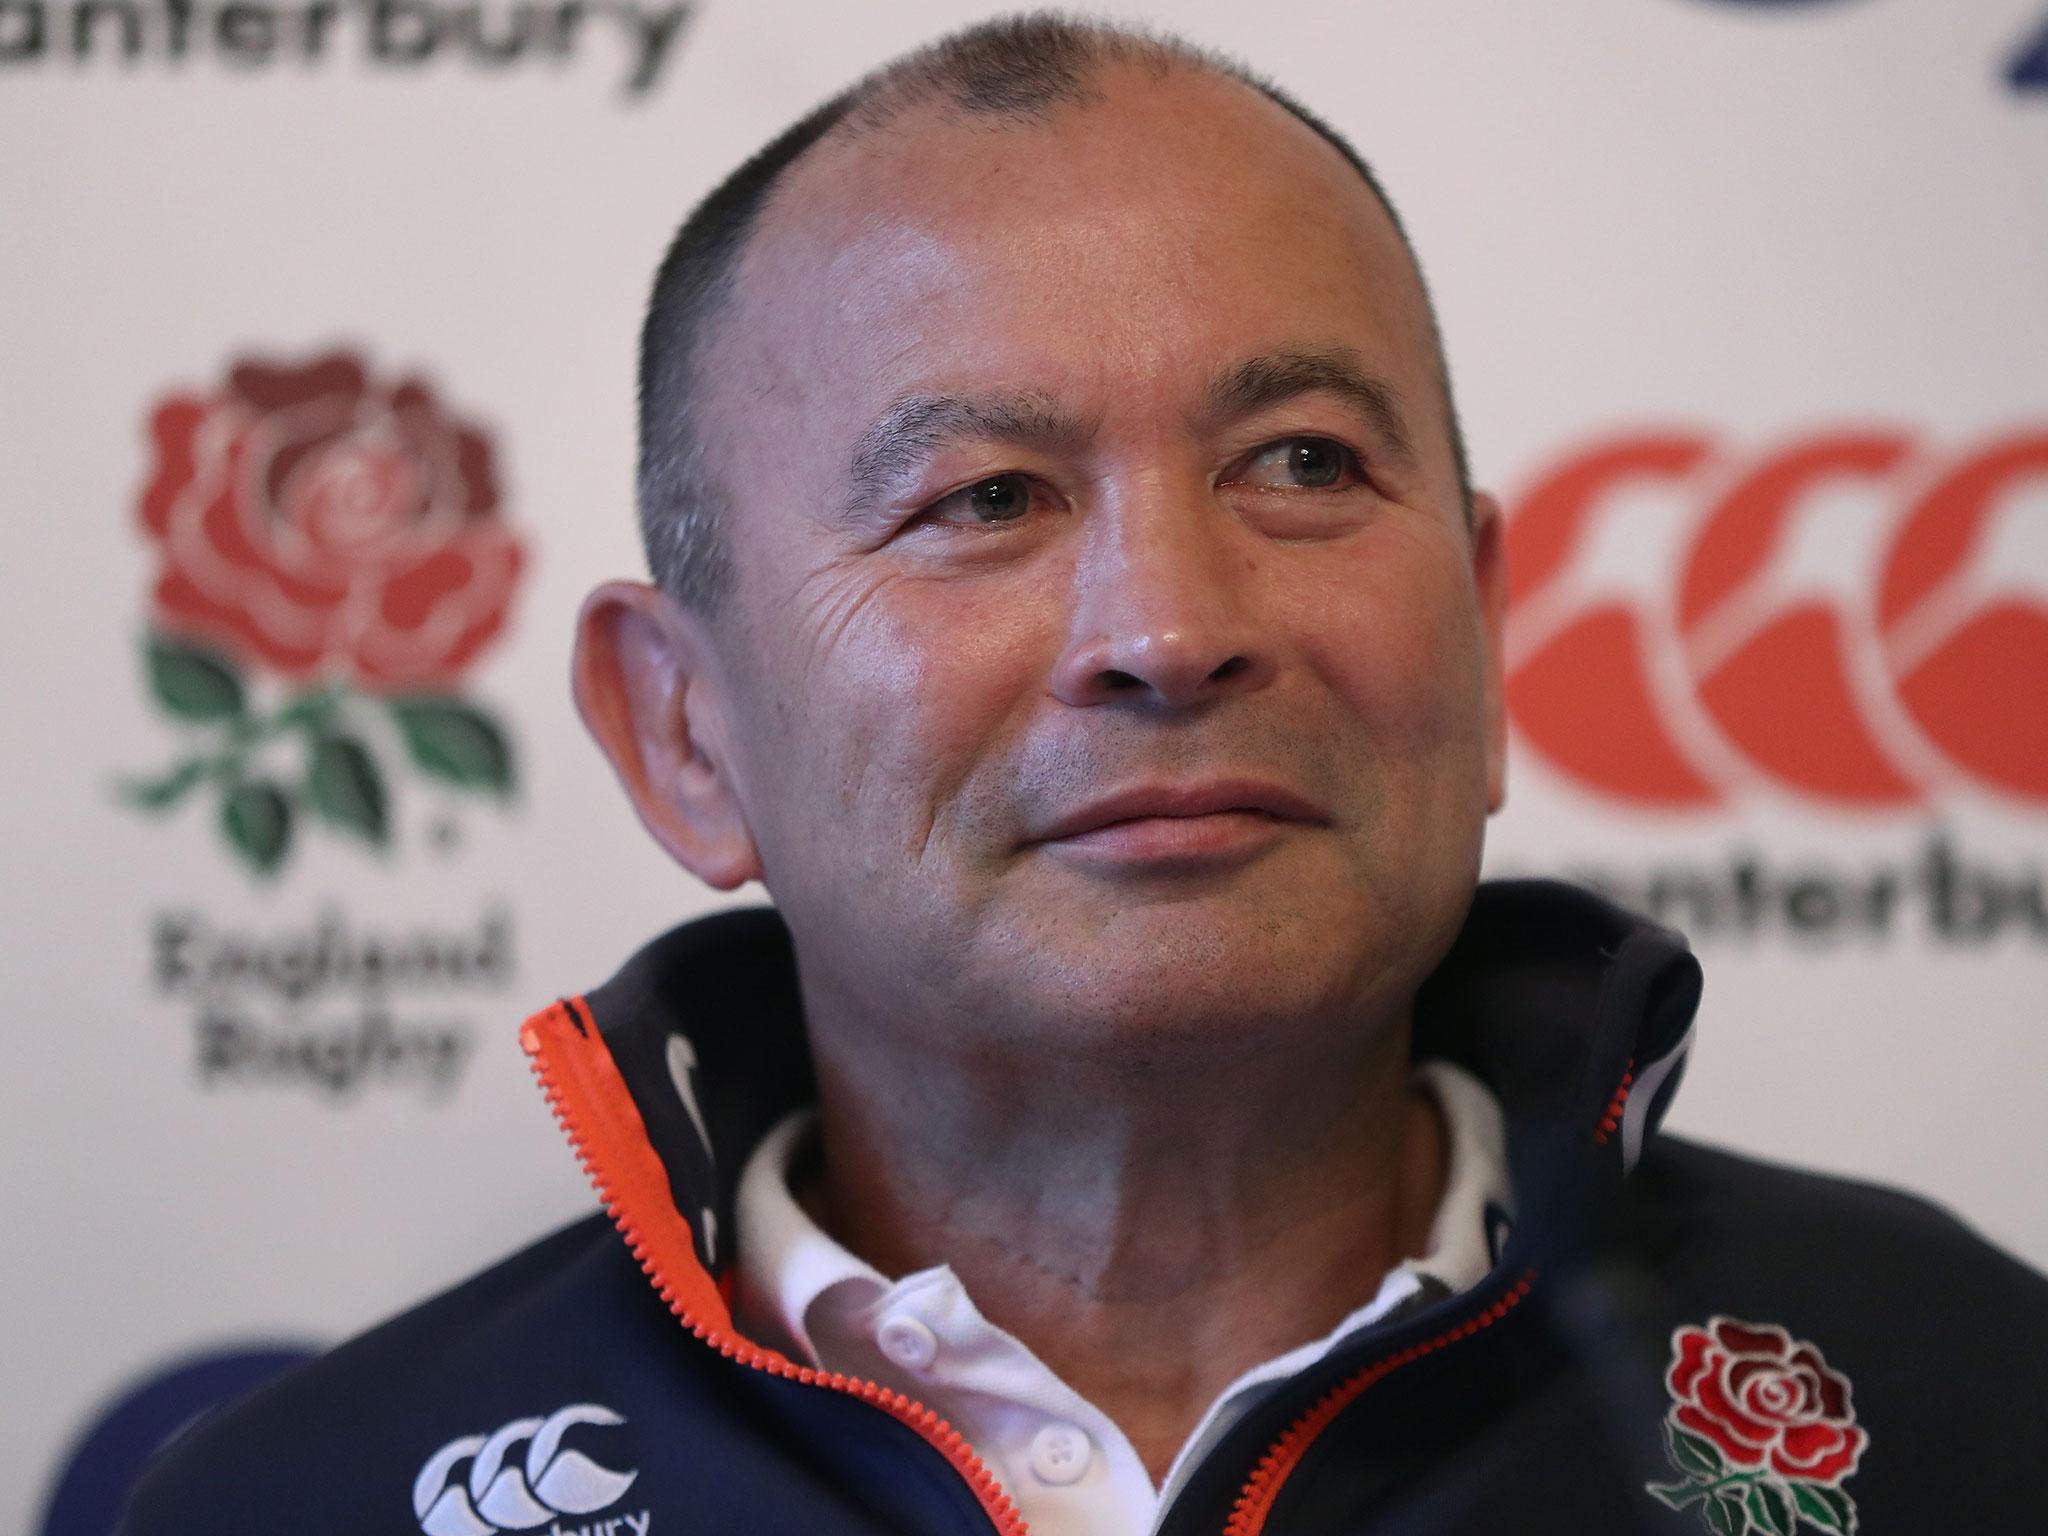 "They're a proud team and they're coming to Twickenham, which is arguably the home of rugby. It's a big stage and they'll want to put their best foot forward," Jones said